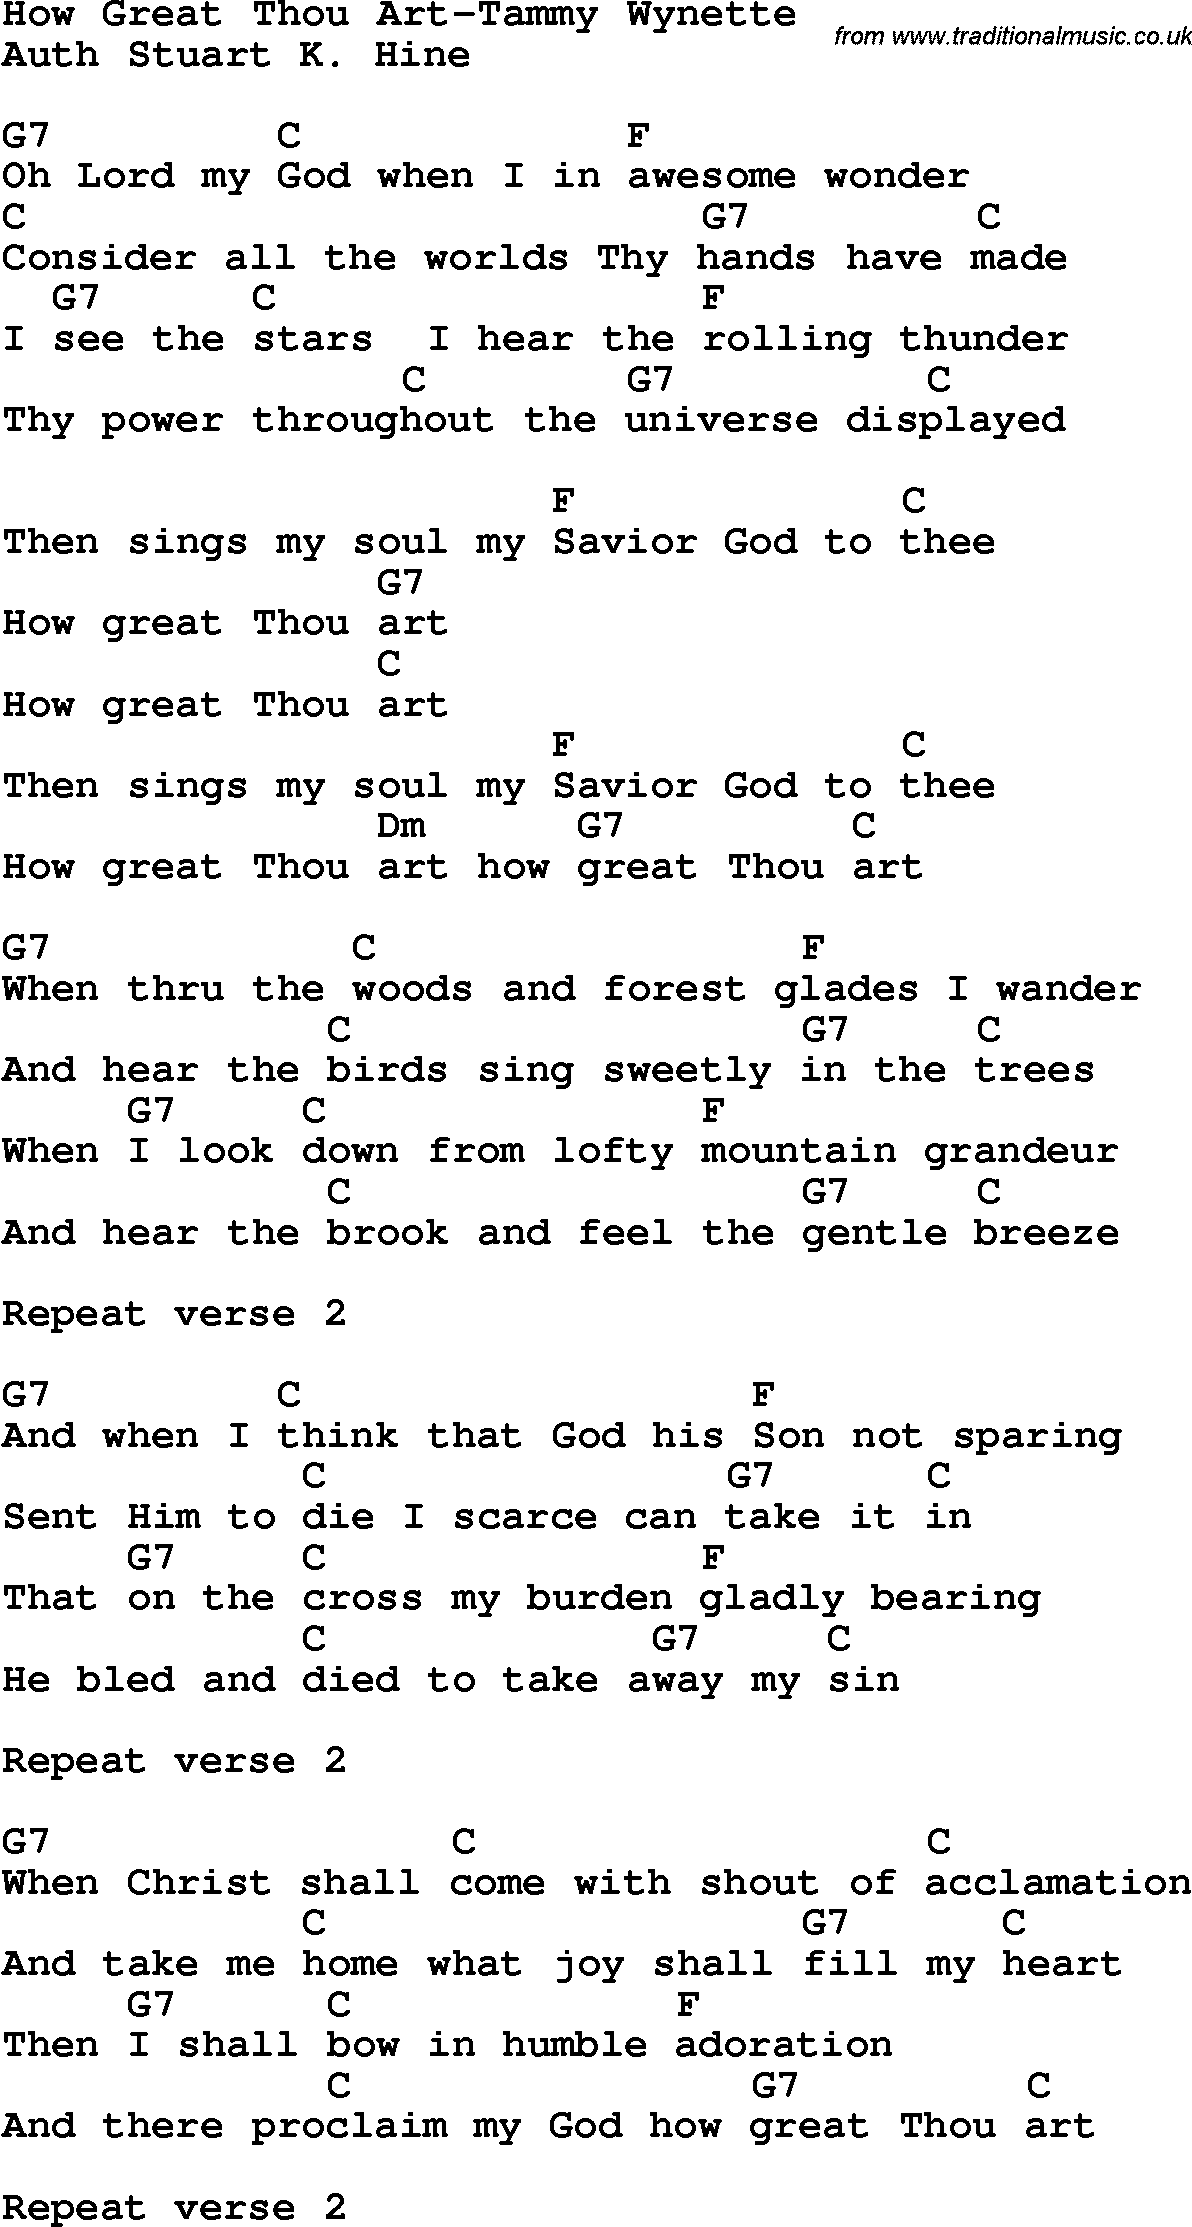 Country, Southern and Bluegrass Gospel Song How Great Thou Art-Tammy Wynette lyrics and chords